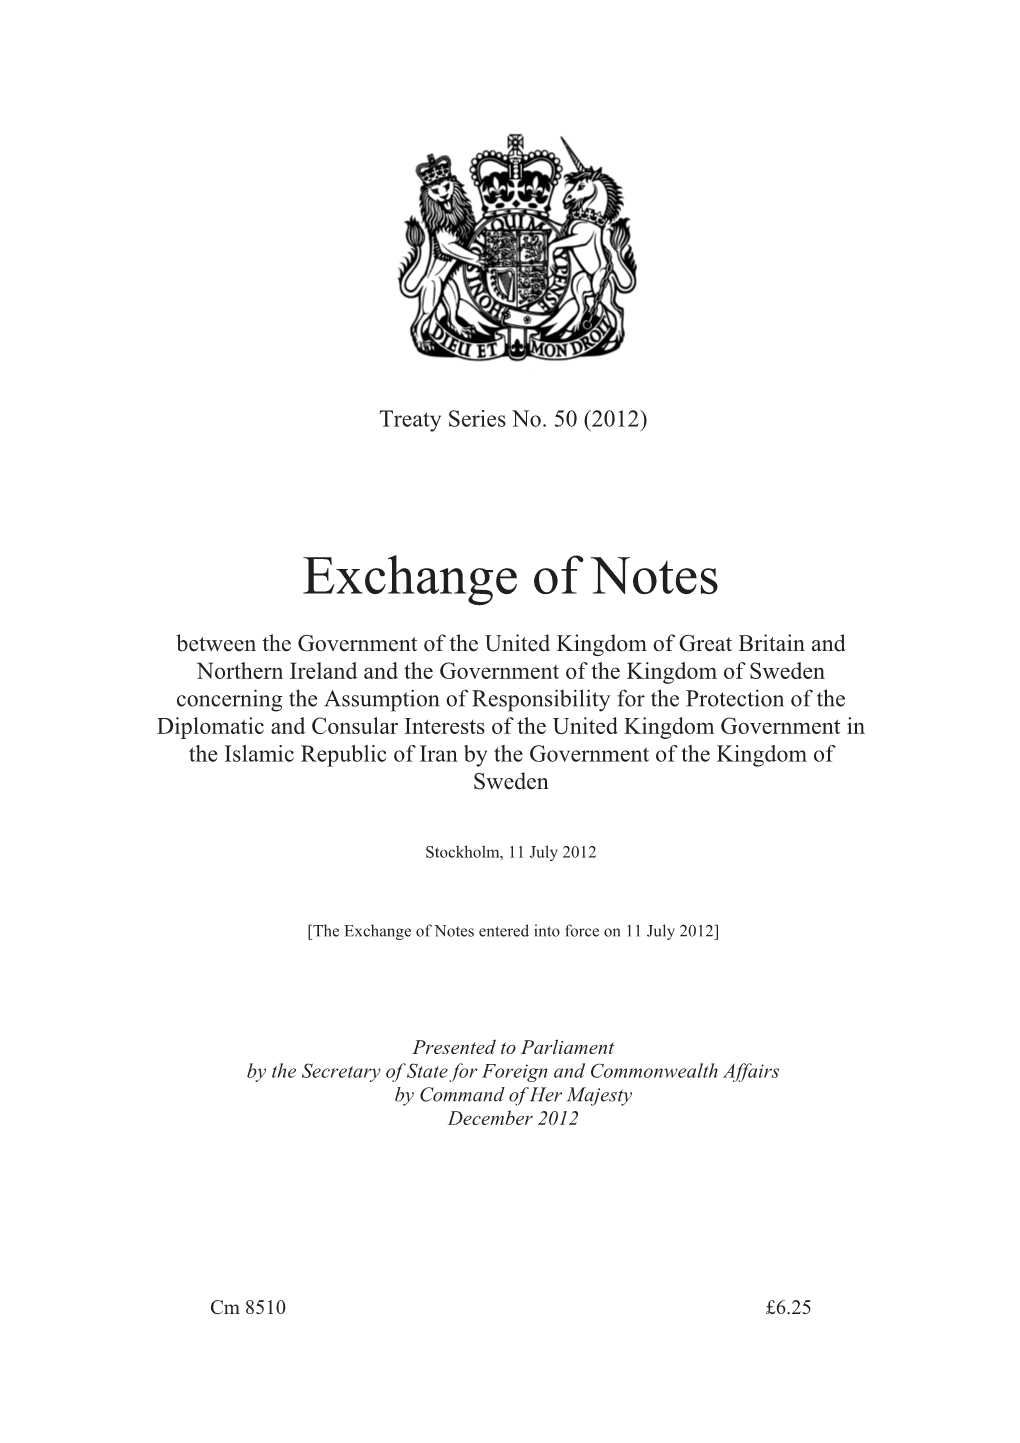 Exchange of Notes